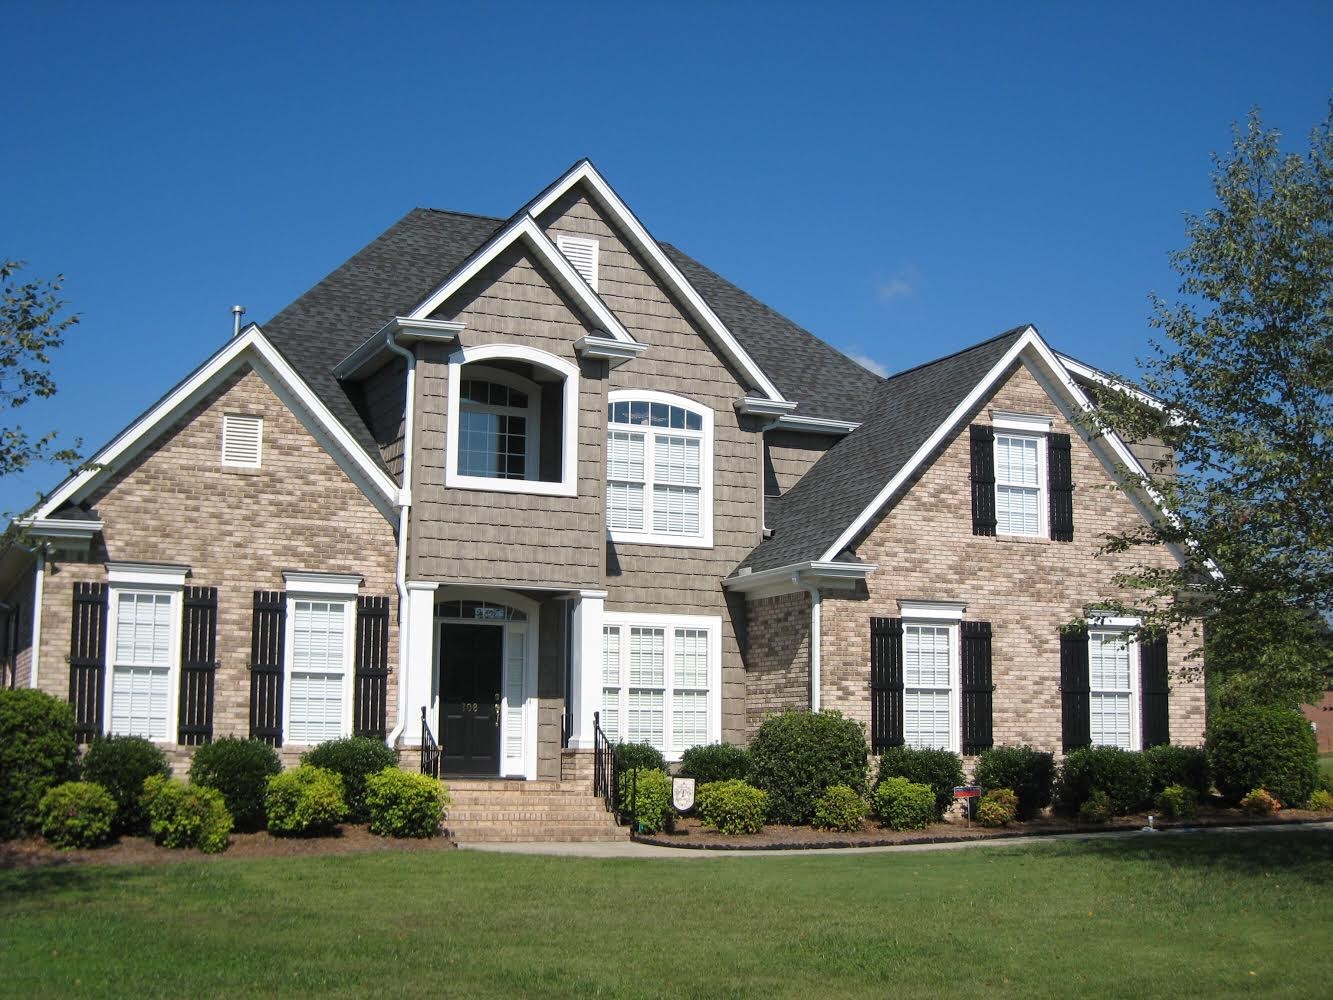 Serving the area since 1964, we are the top local choice for roofing repair and installation, siding and gutter installation, as well as window replacement in Greenville, Anderson, Spartanburg, Oconee, and Pickens counties!  Contact us today to schedule a consultation!